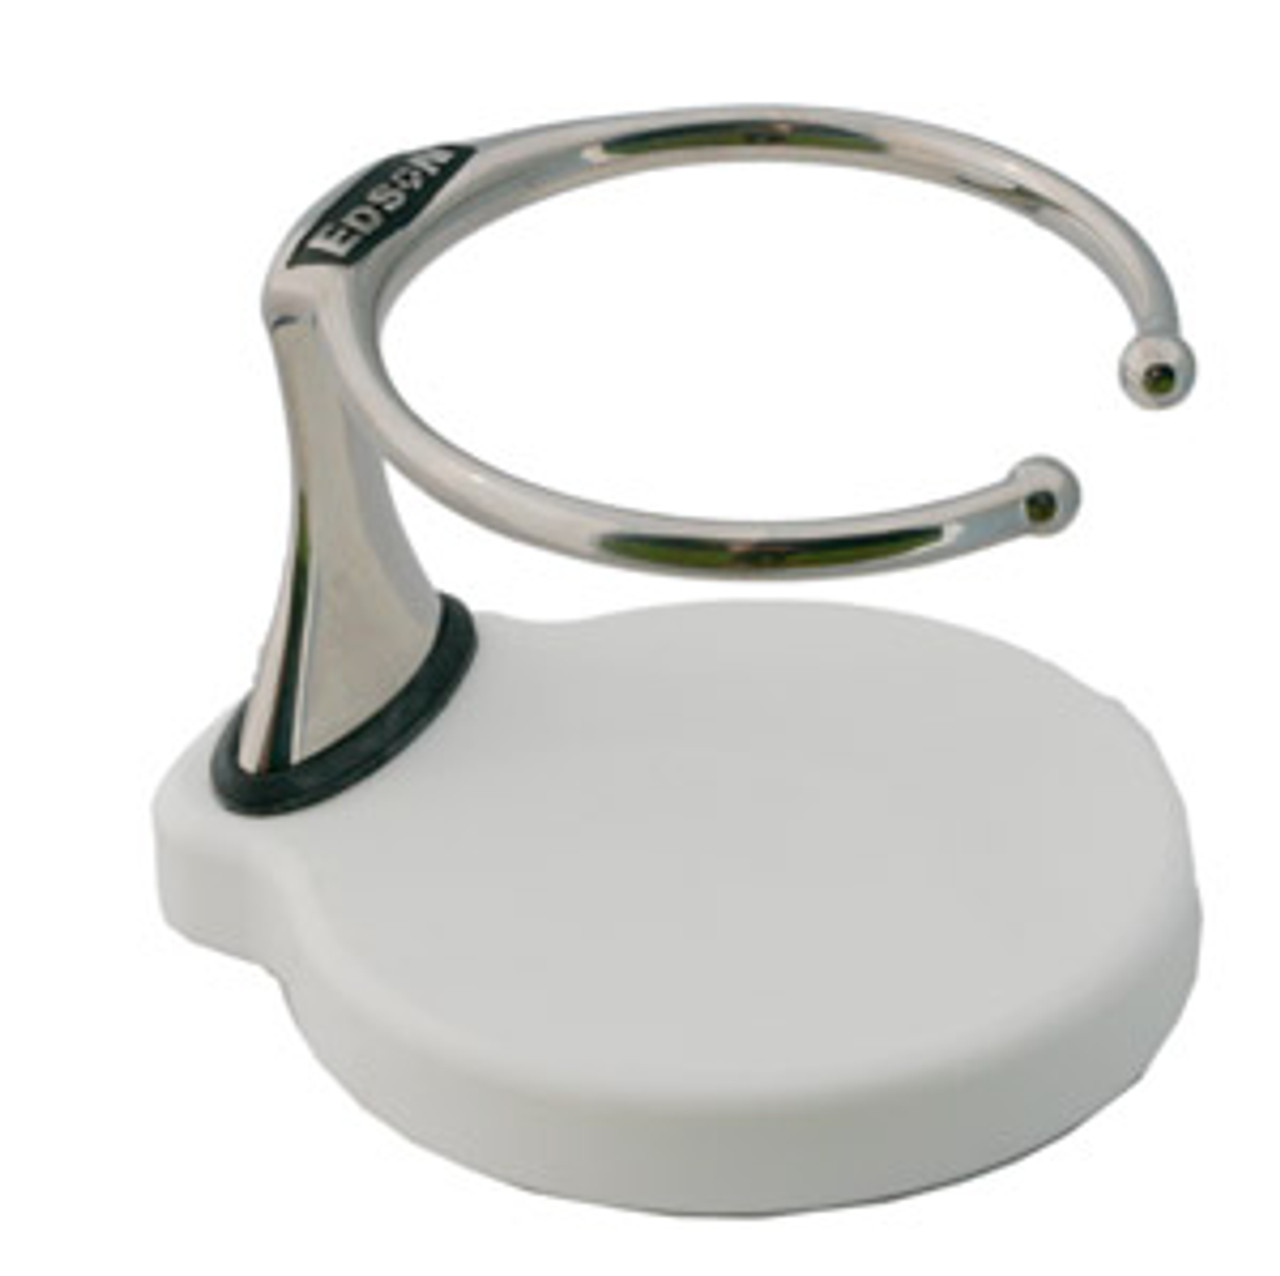 Boat Drink Holders Stainless Flush Mount Cup Holder